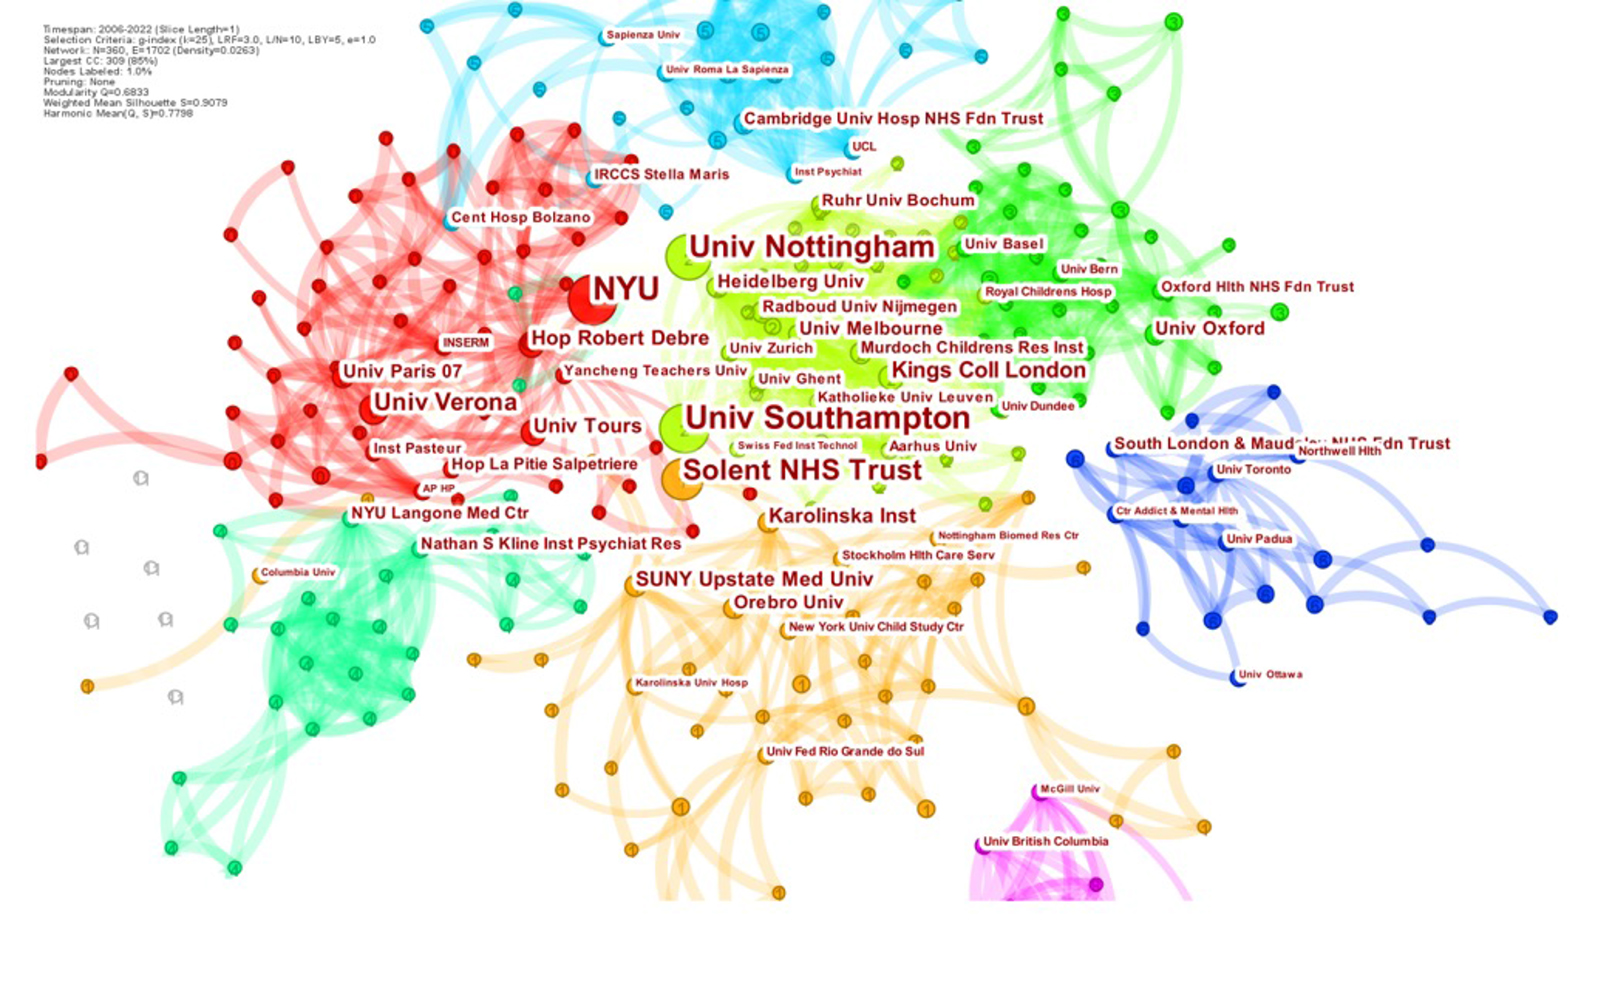 Network of research collaborations